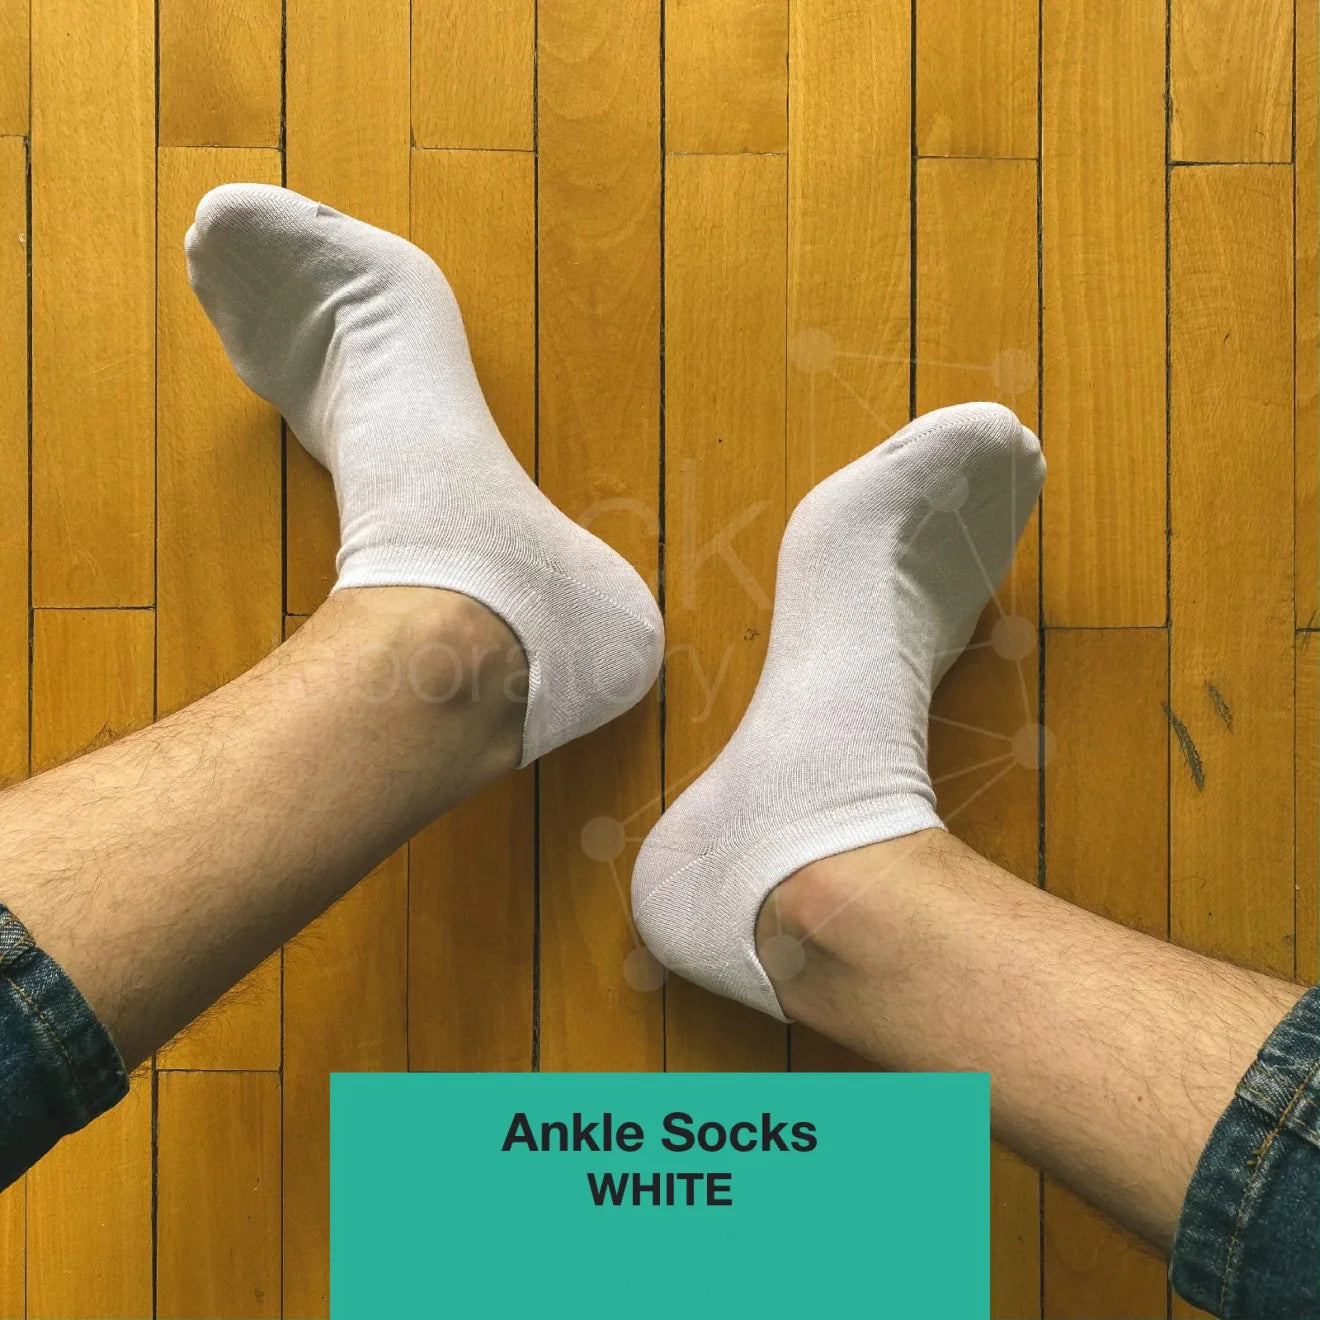 THE ANKLES - Set of 3 / White